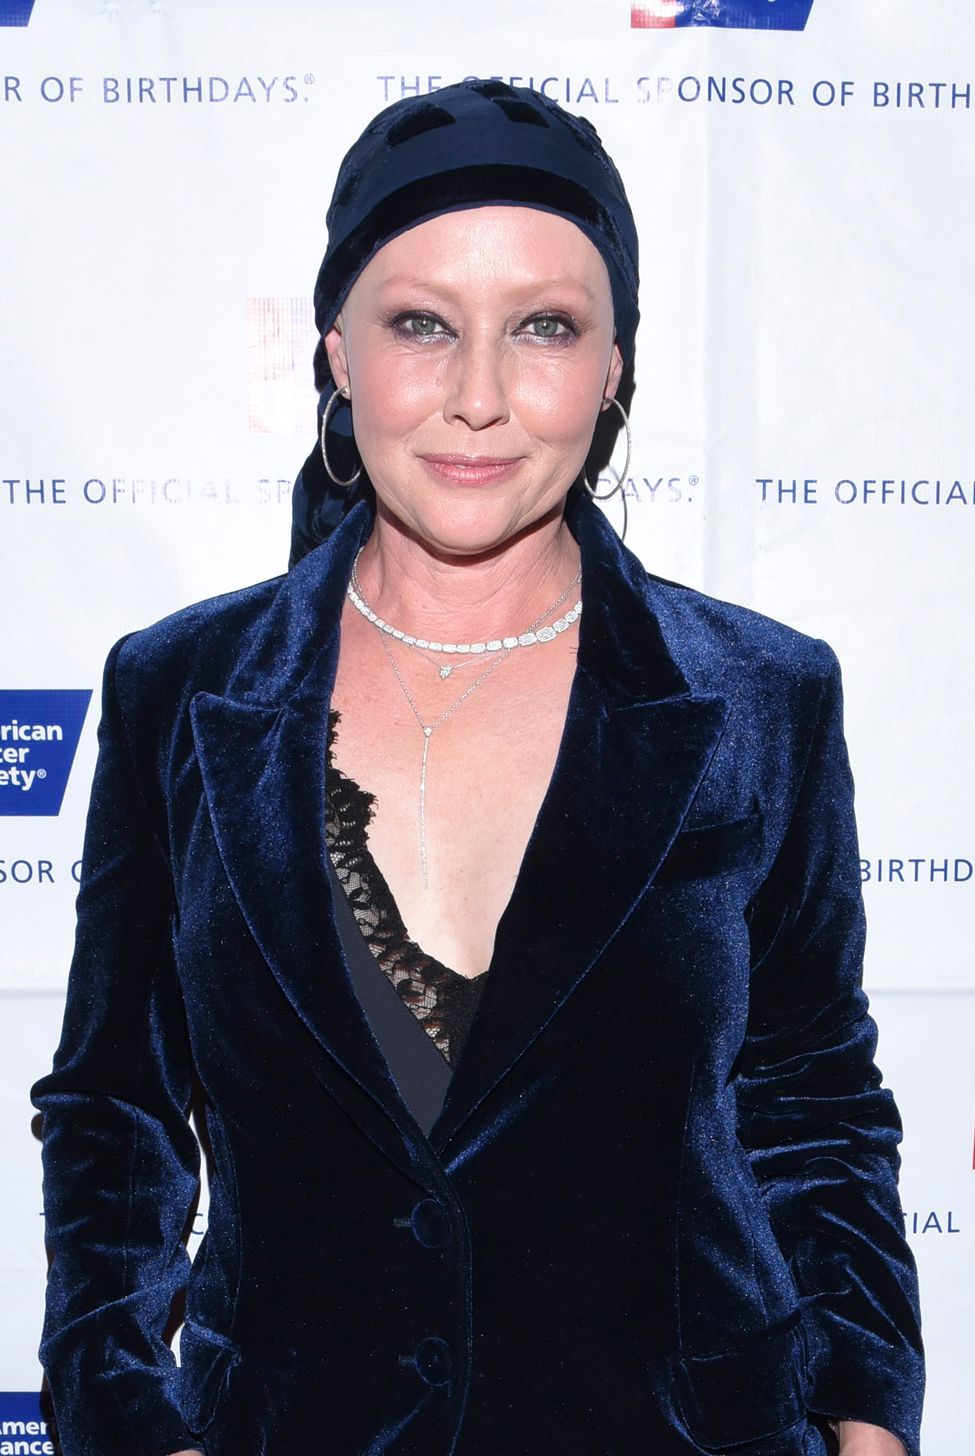 Actress Shannen Doherty arrives at the American Cancer Society's Giants of Science Los Angeles Gala on November 5, 2016 in Los Angeles, California.